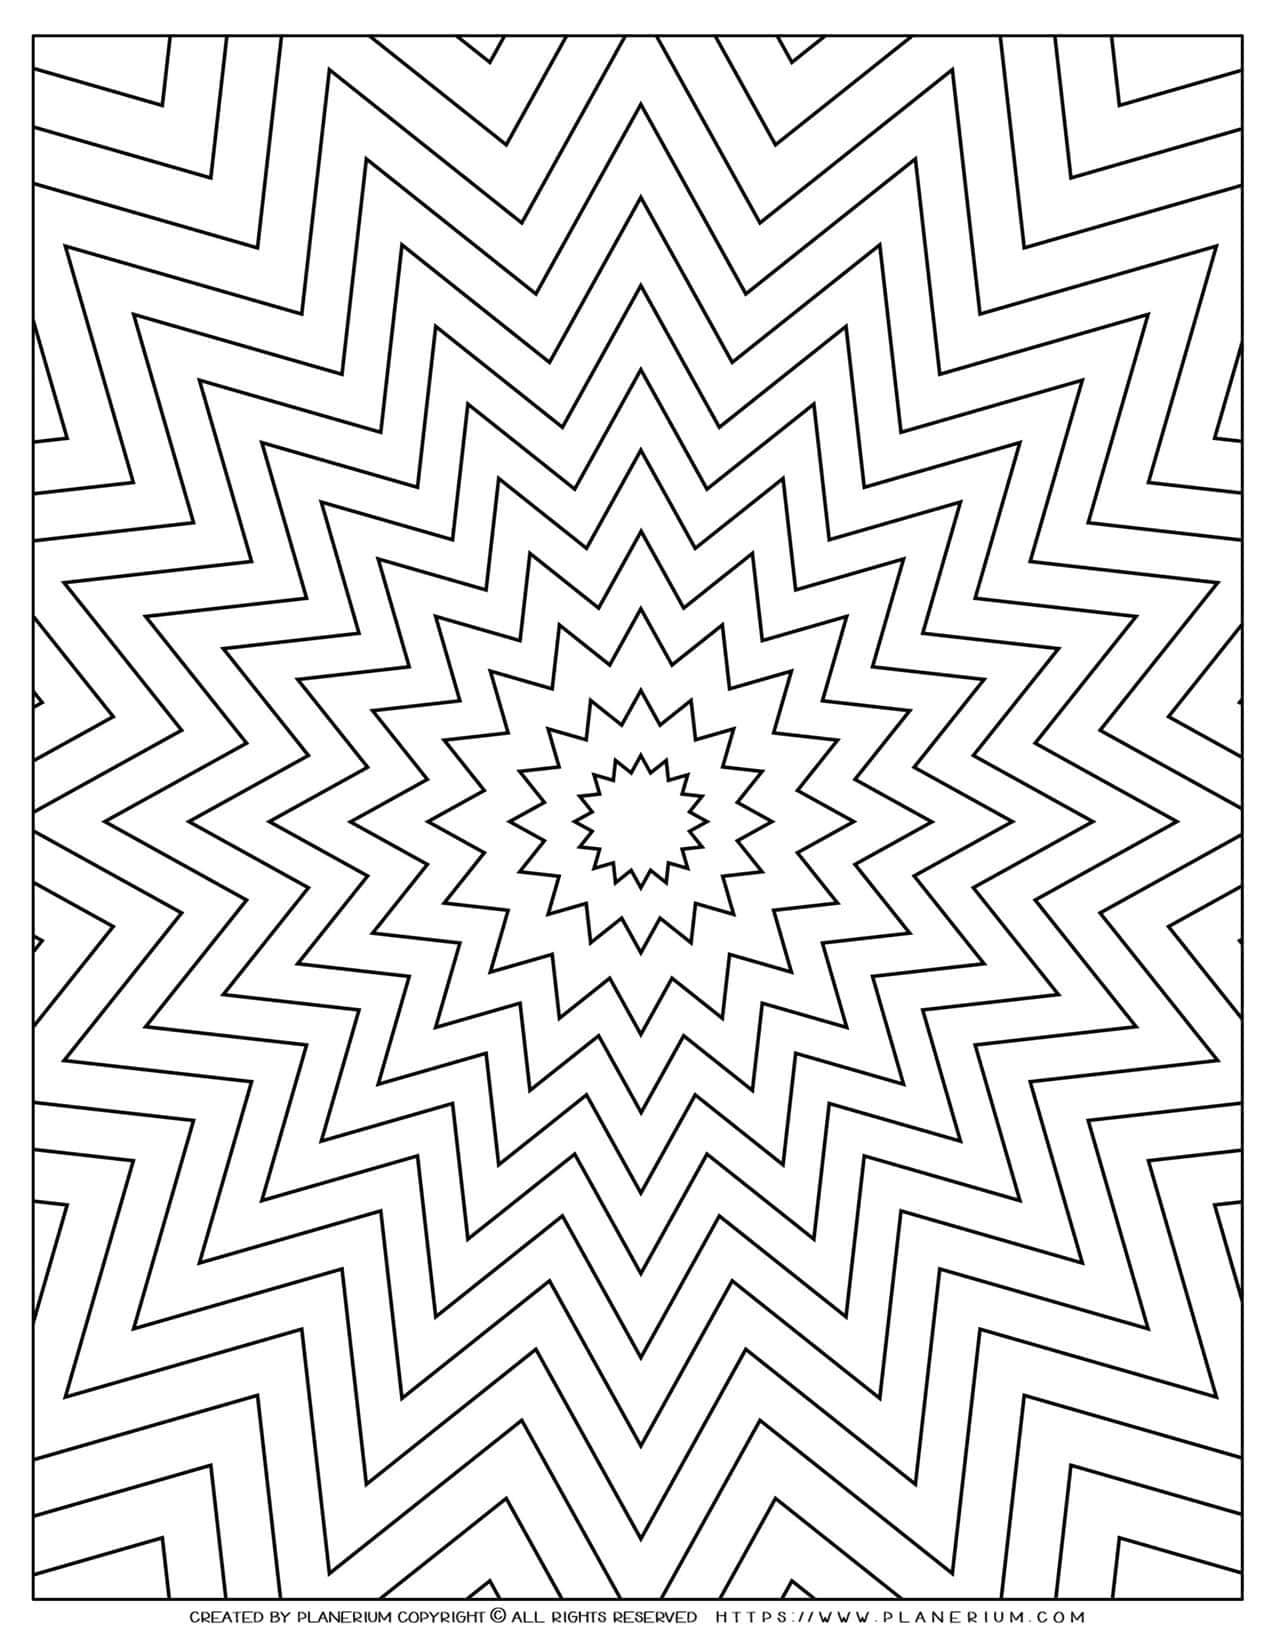 Nested star coloring page geometric design free printable